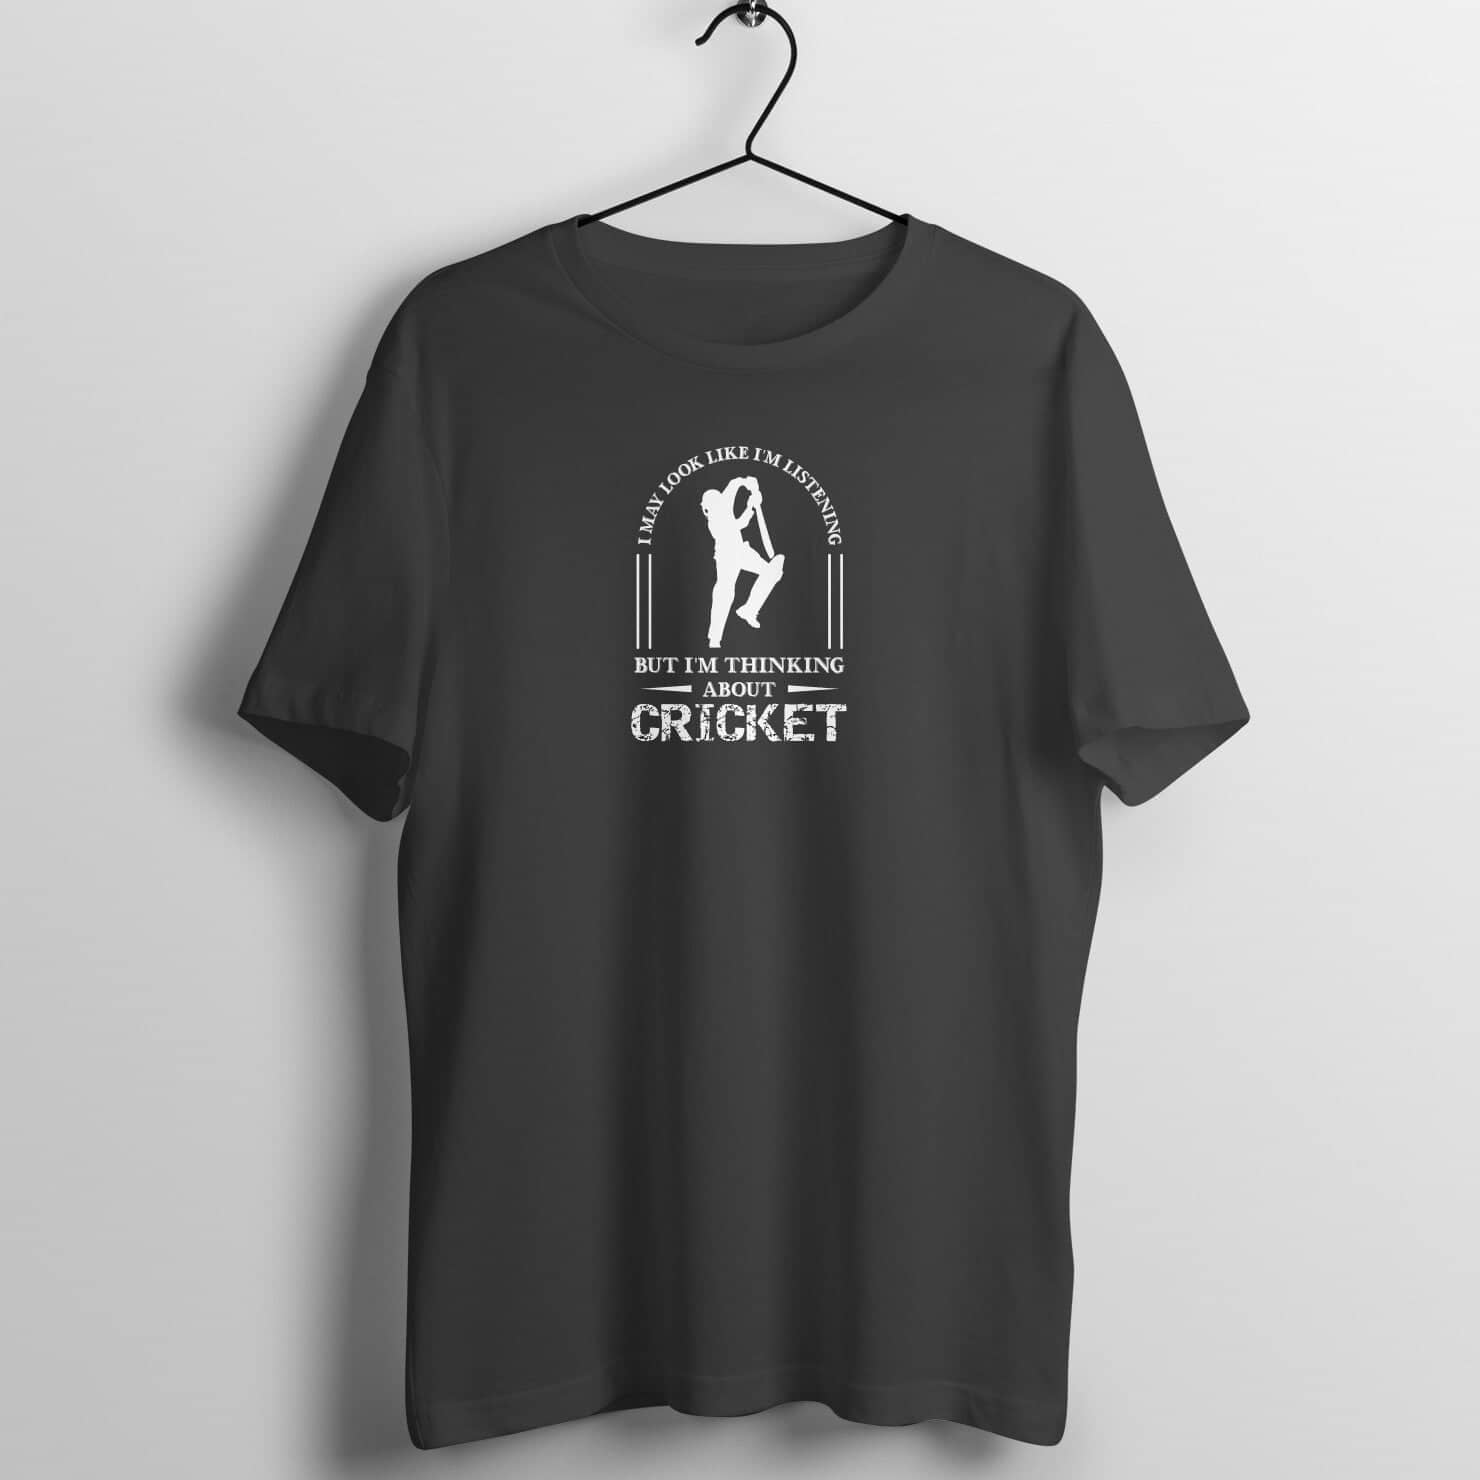 It May Look Like I'm Listening But I 'm Thinking about Cricket Funny Black T Shirt for Men freeshipping - Catch My Drift India